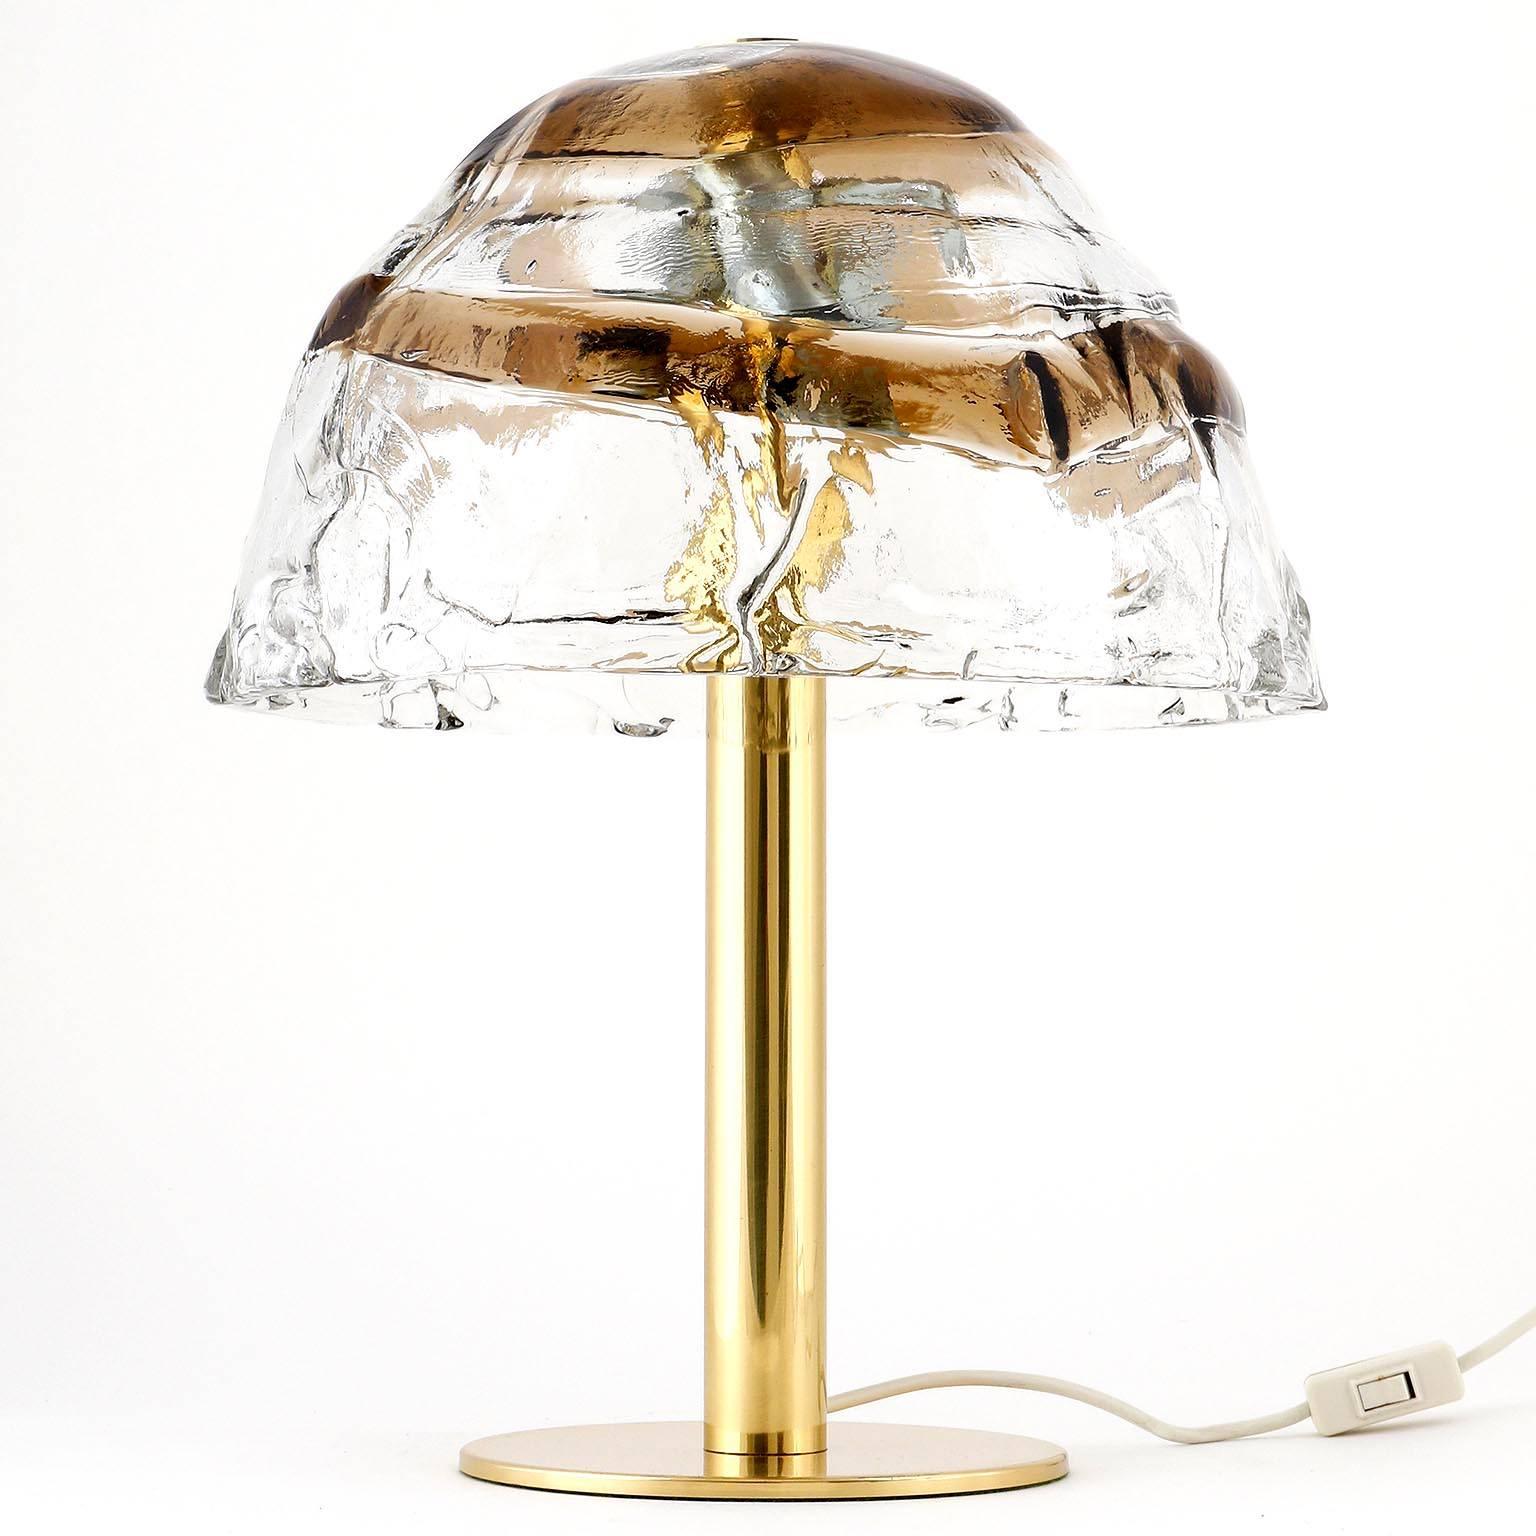 A pair of table lights by J.T. Kalmar, Austria, manufactured in midcentury, circa 1970 (1960s-1970s). A large lamp shade made of clear and smoked or brown glass is held by a brass stand. A nice and large brass bolt holds the glass on top of the